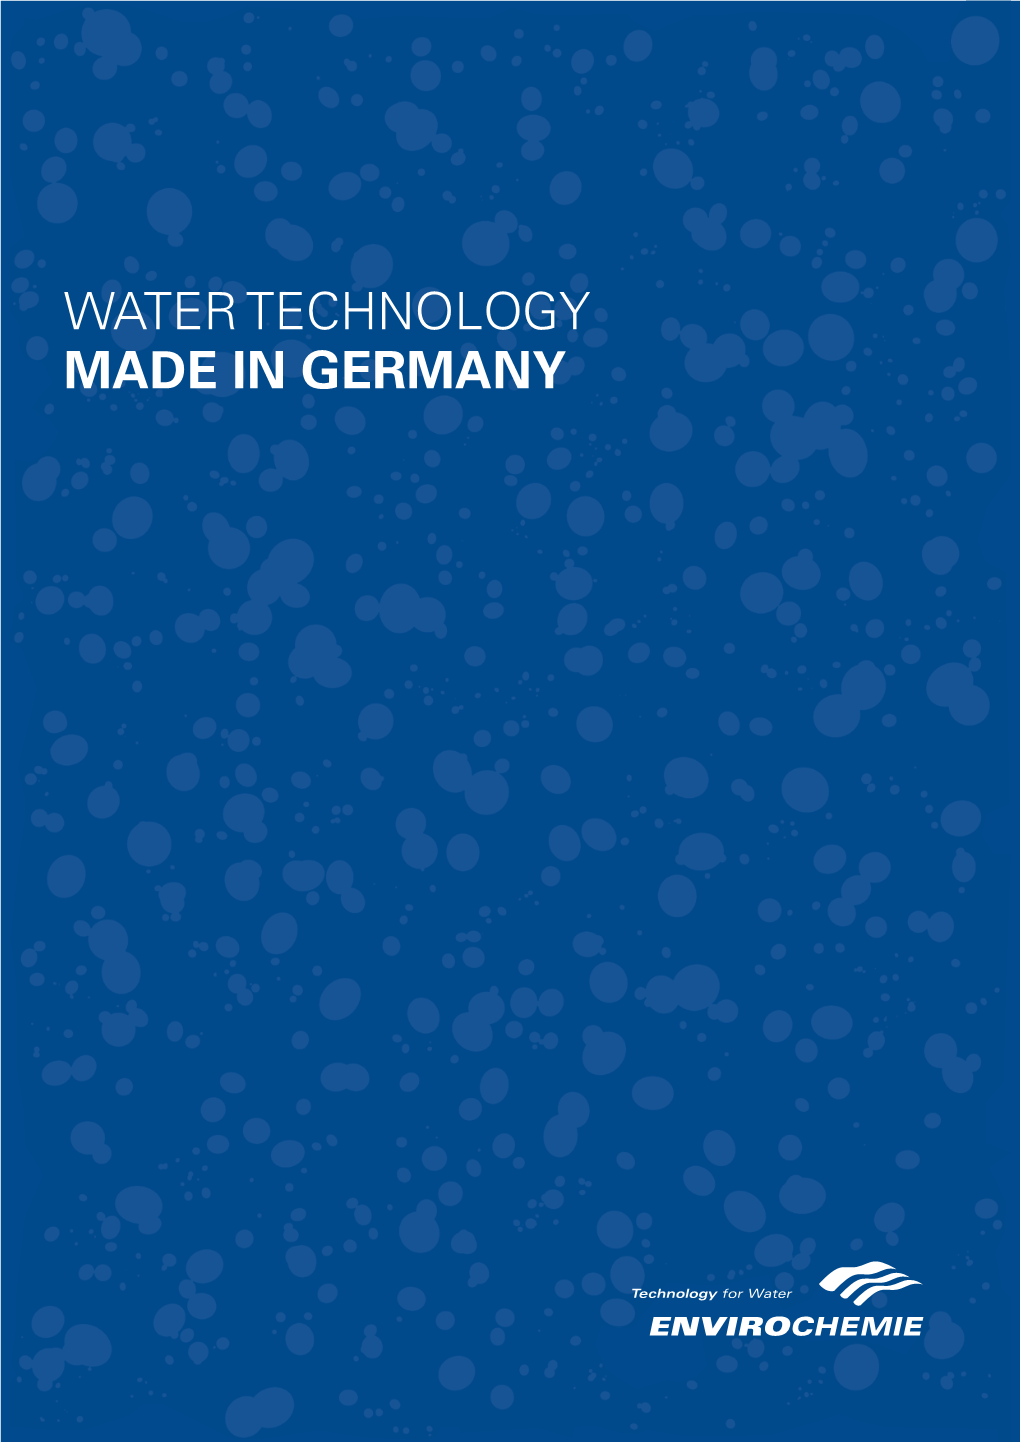 Water Technology Made in Germany Products, Components, Individual Parts, Employees, Research, All Made in Germany